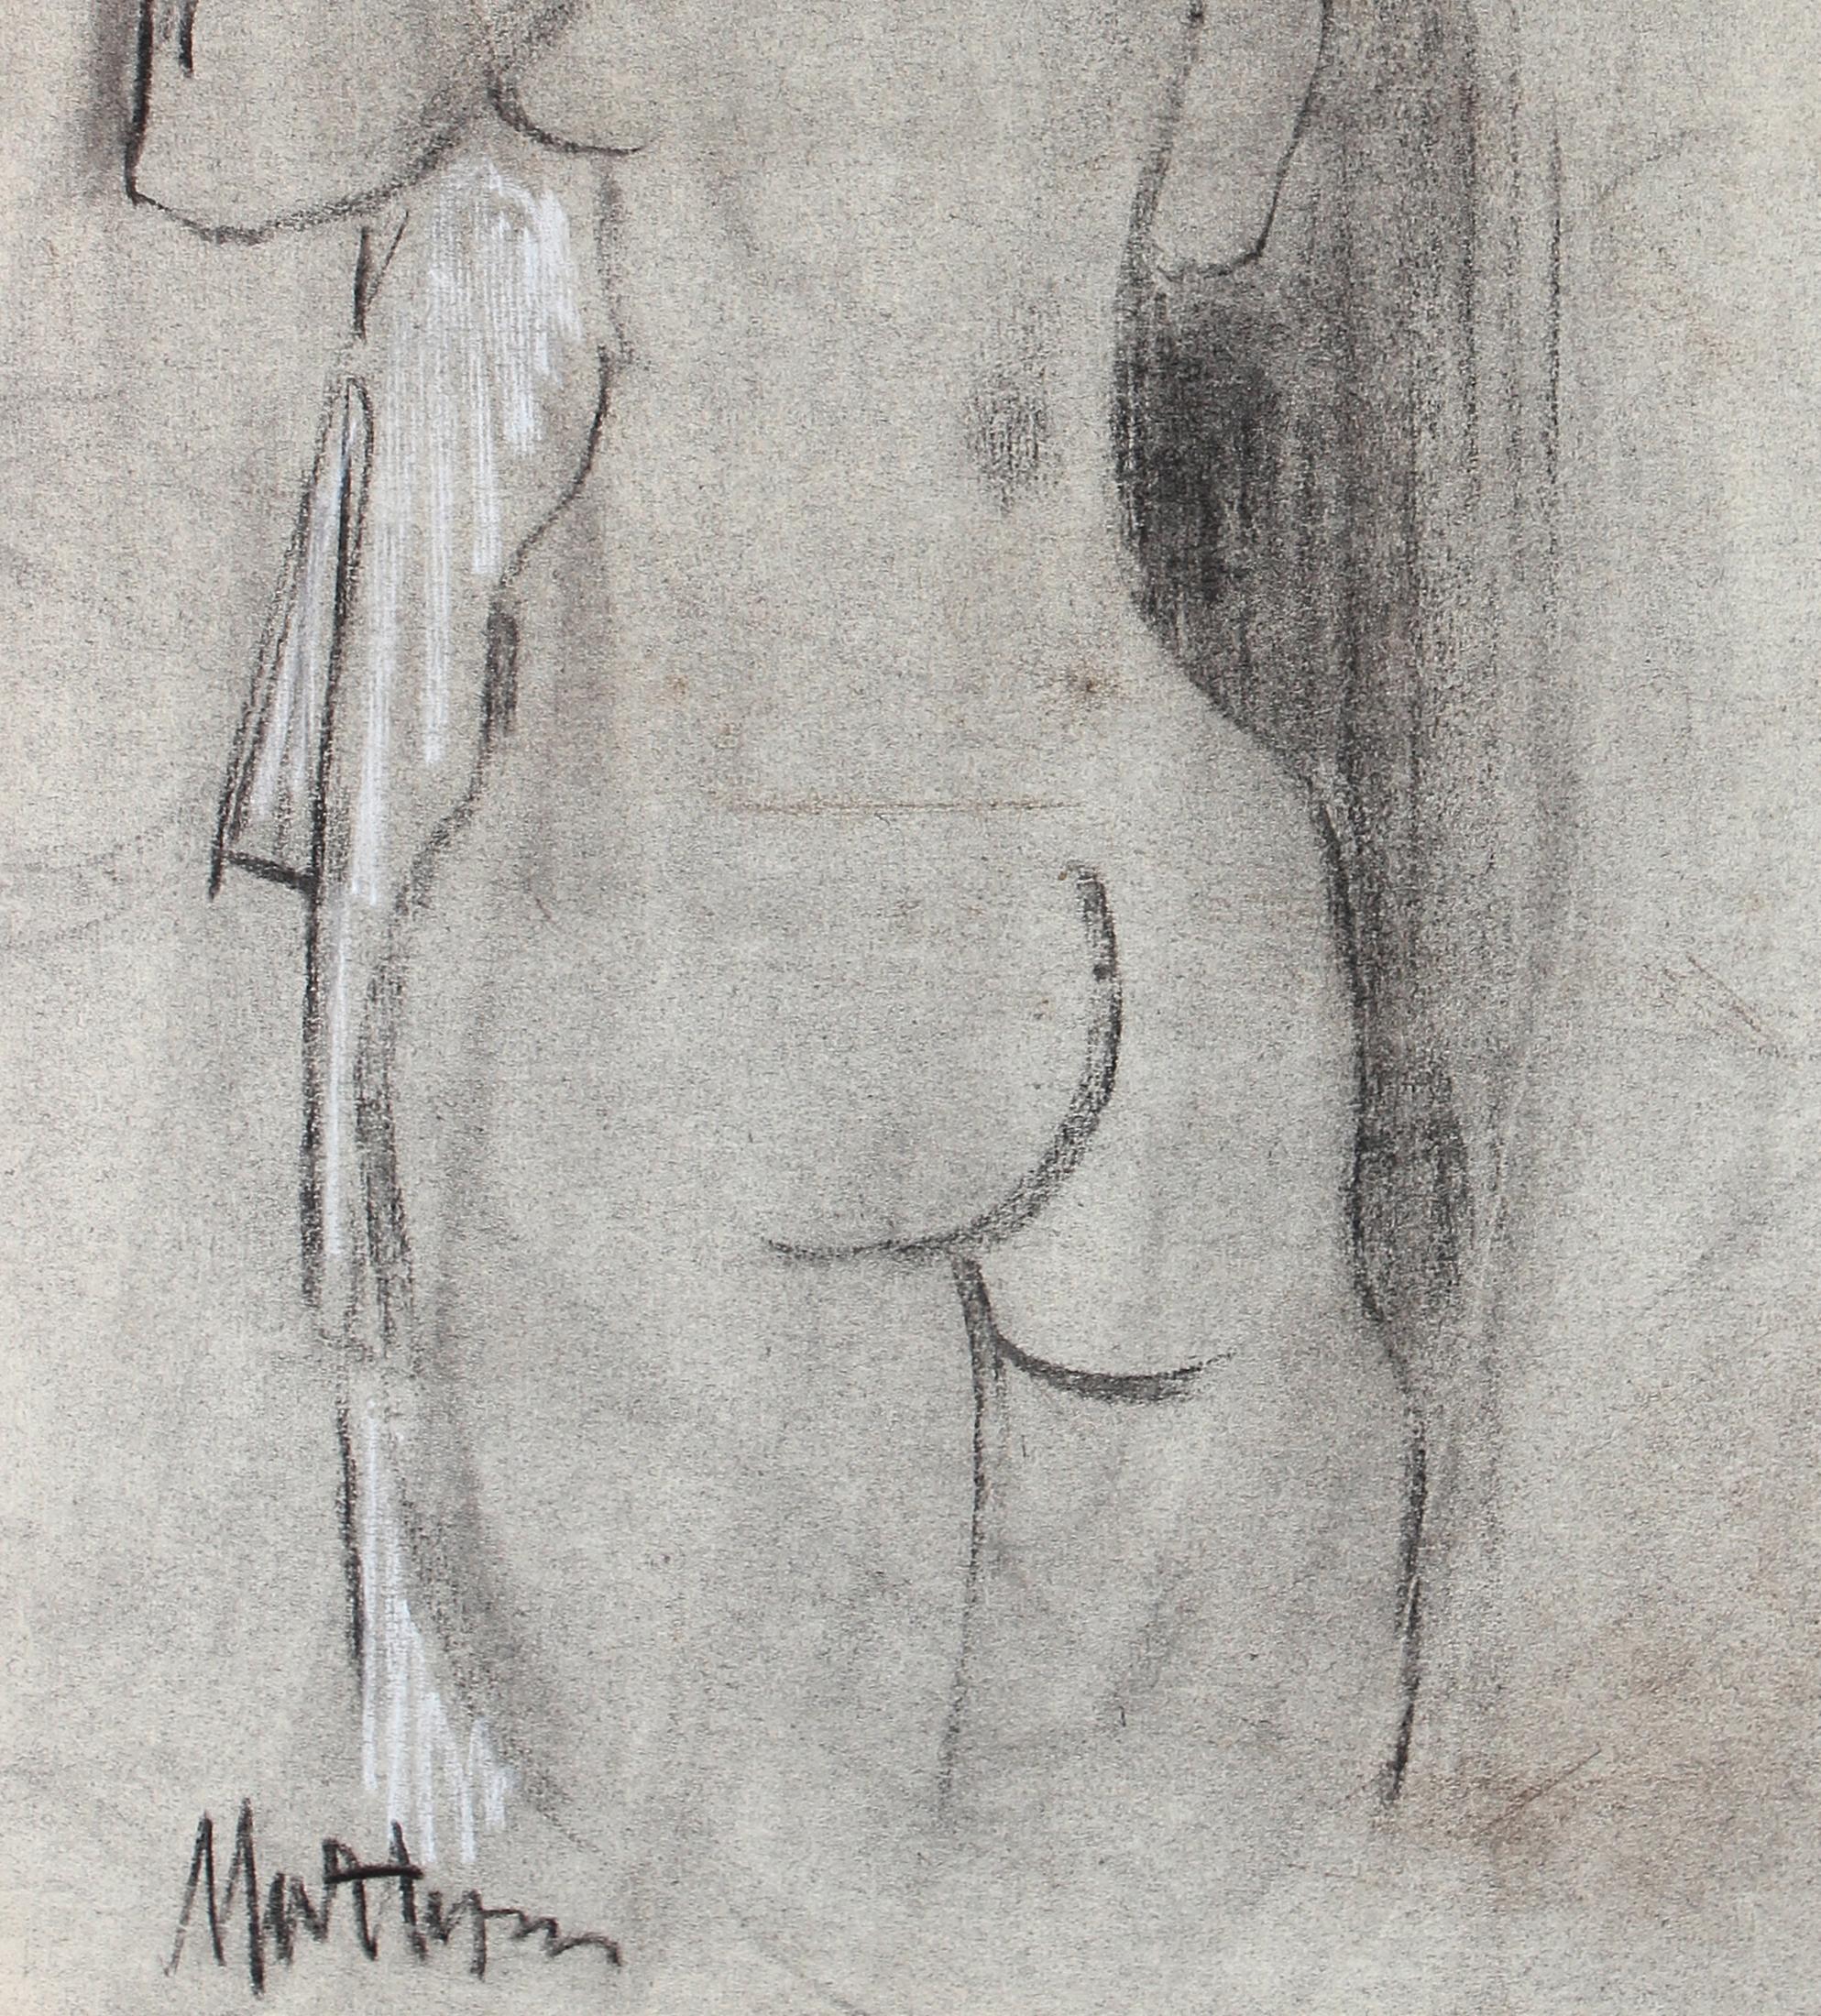 1940s Figurative Nude Sketch in Charcoal - Art by Rip Matteson